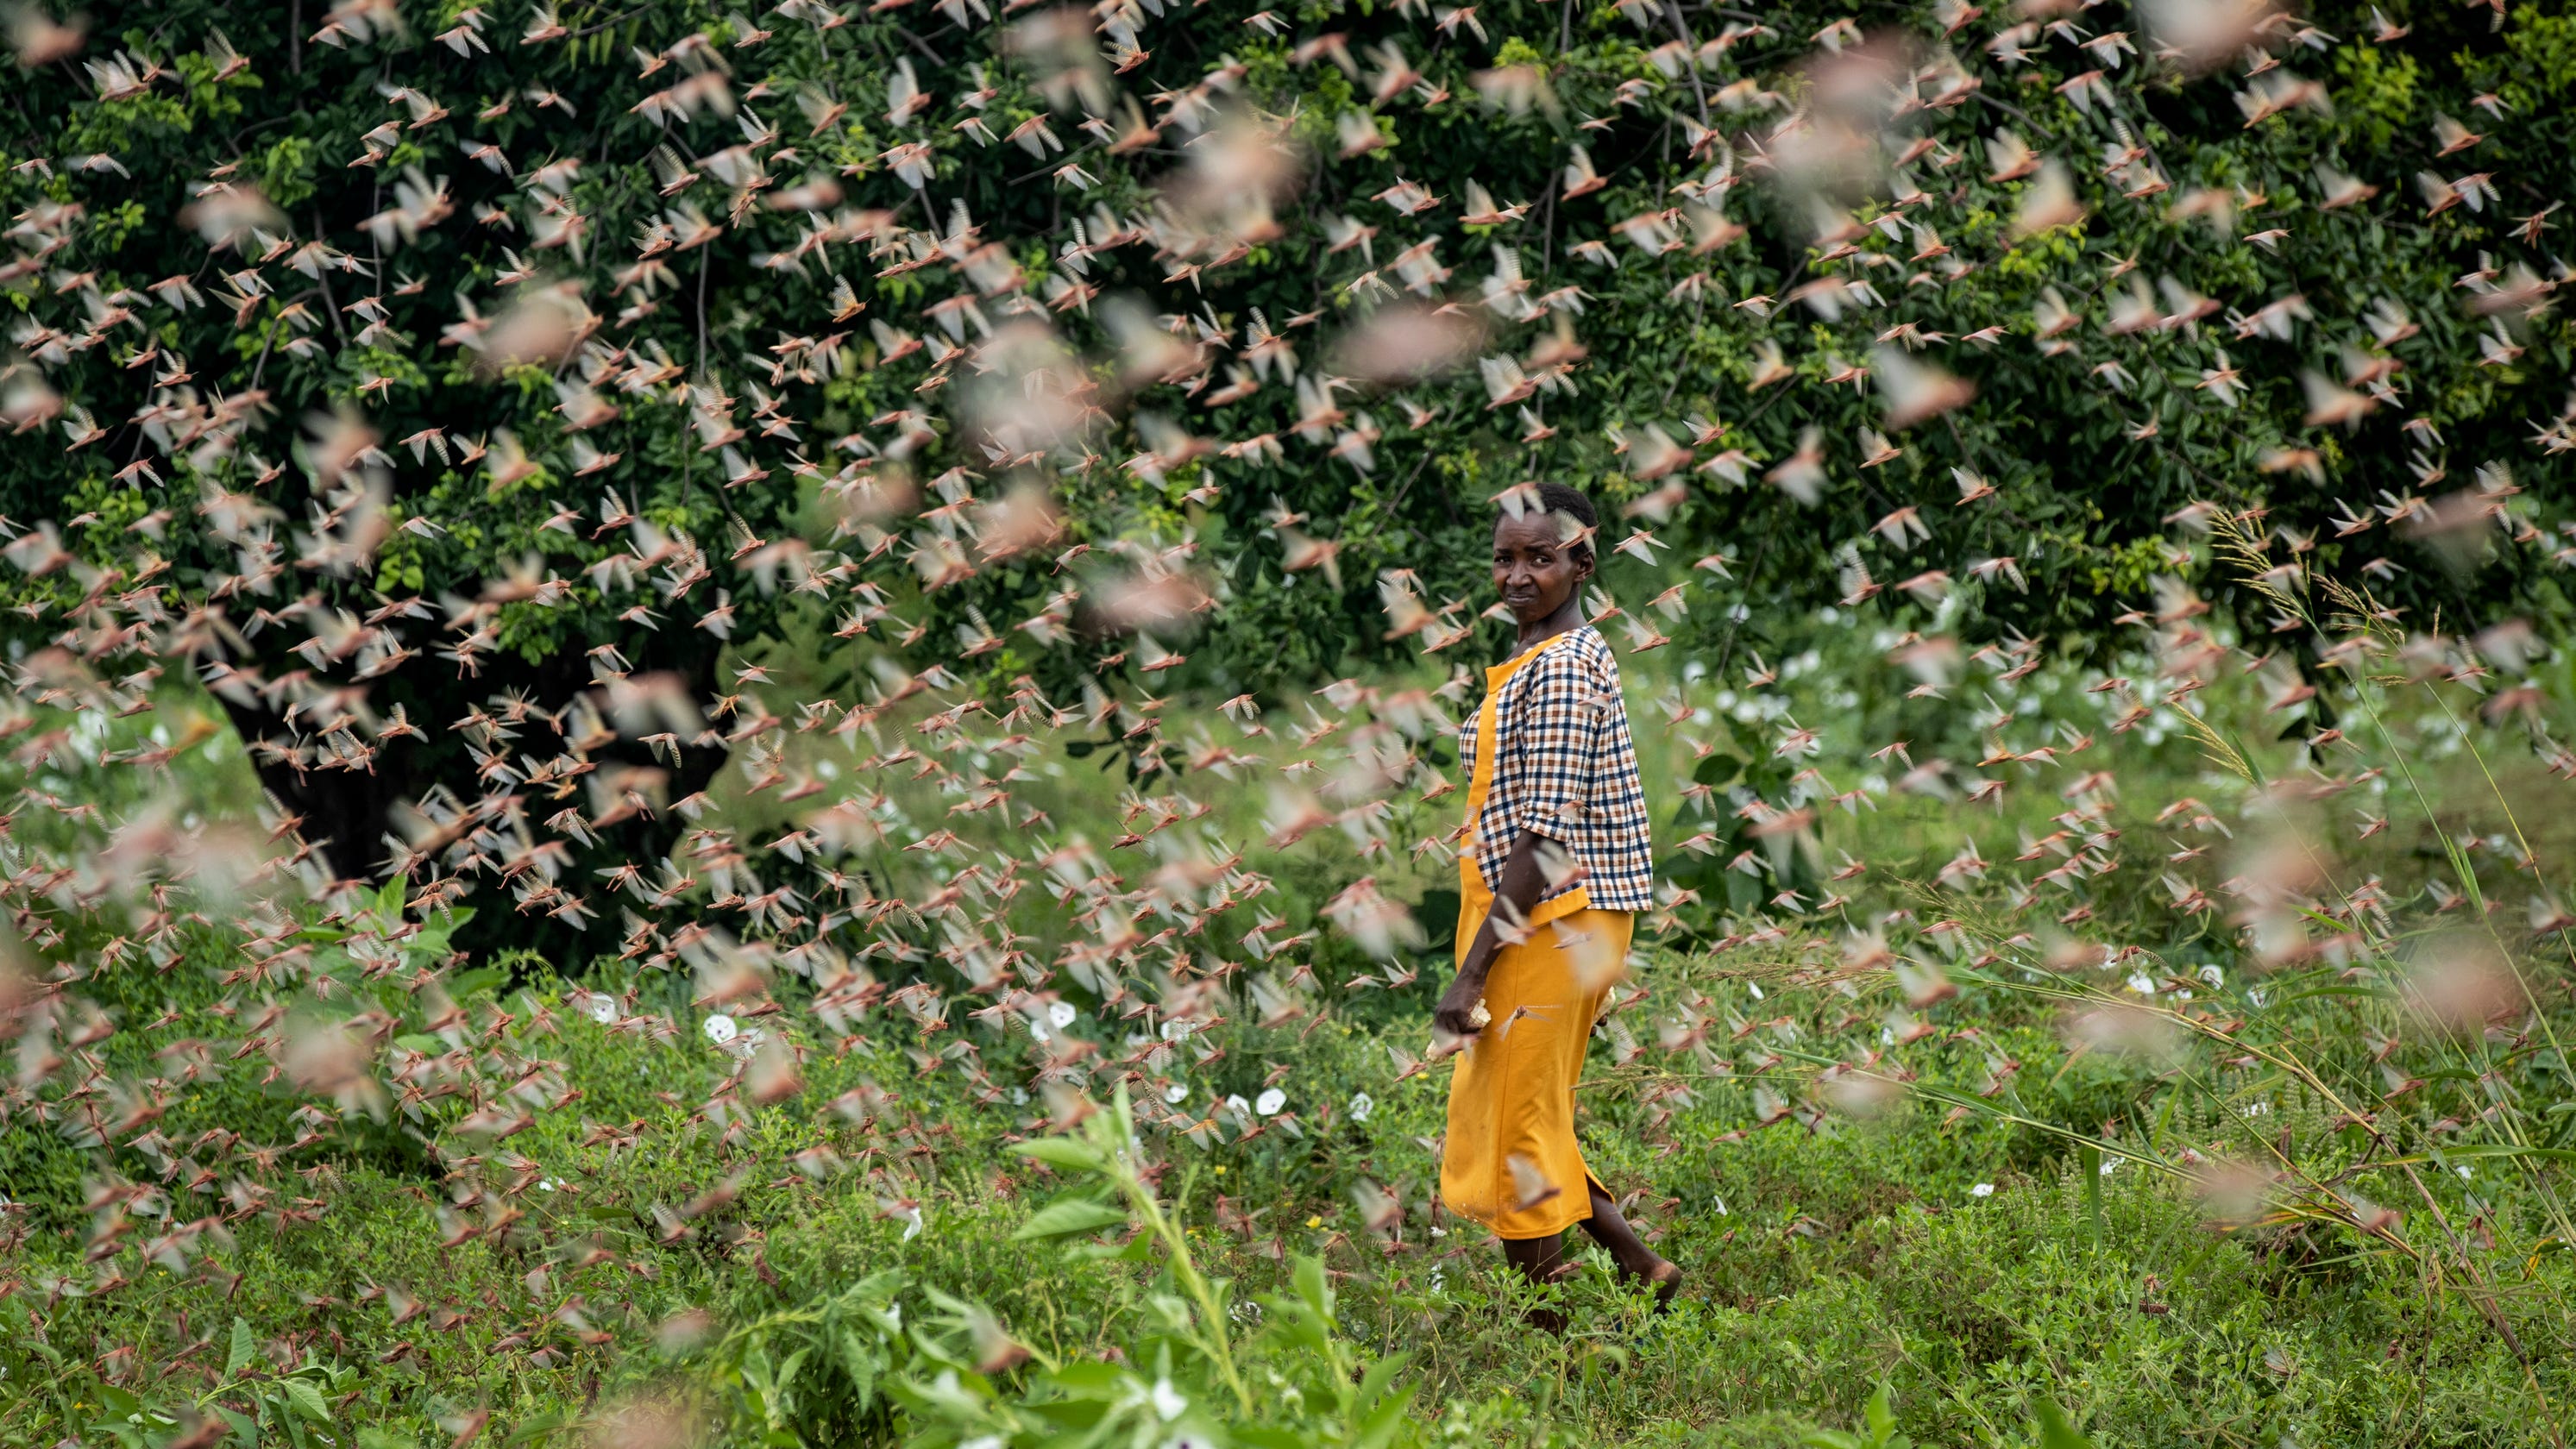 Millions of locusts are swarming in Kenya. These striking photos show just how bad the outbreak is